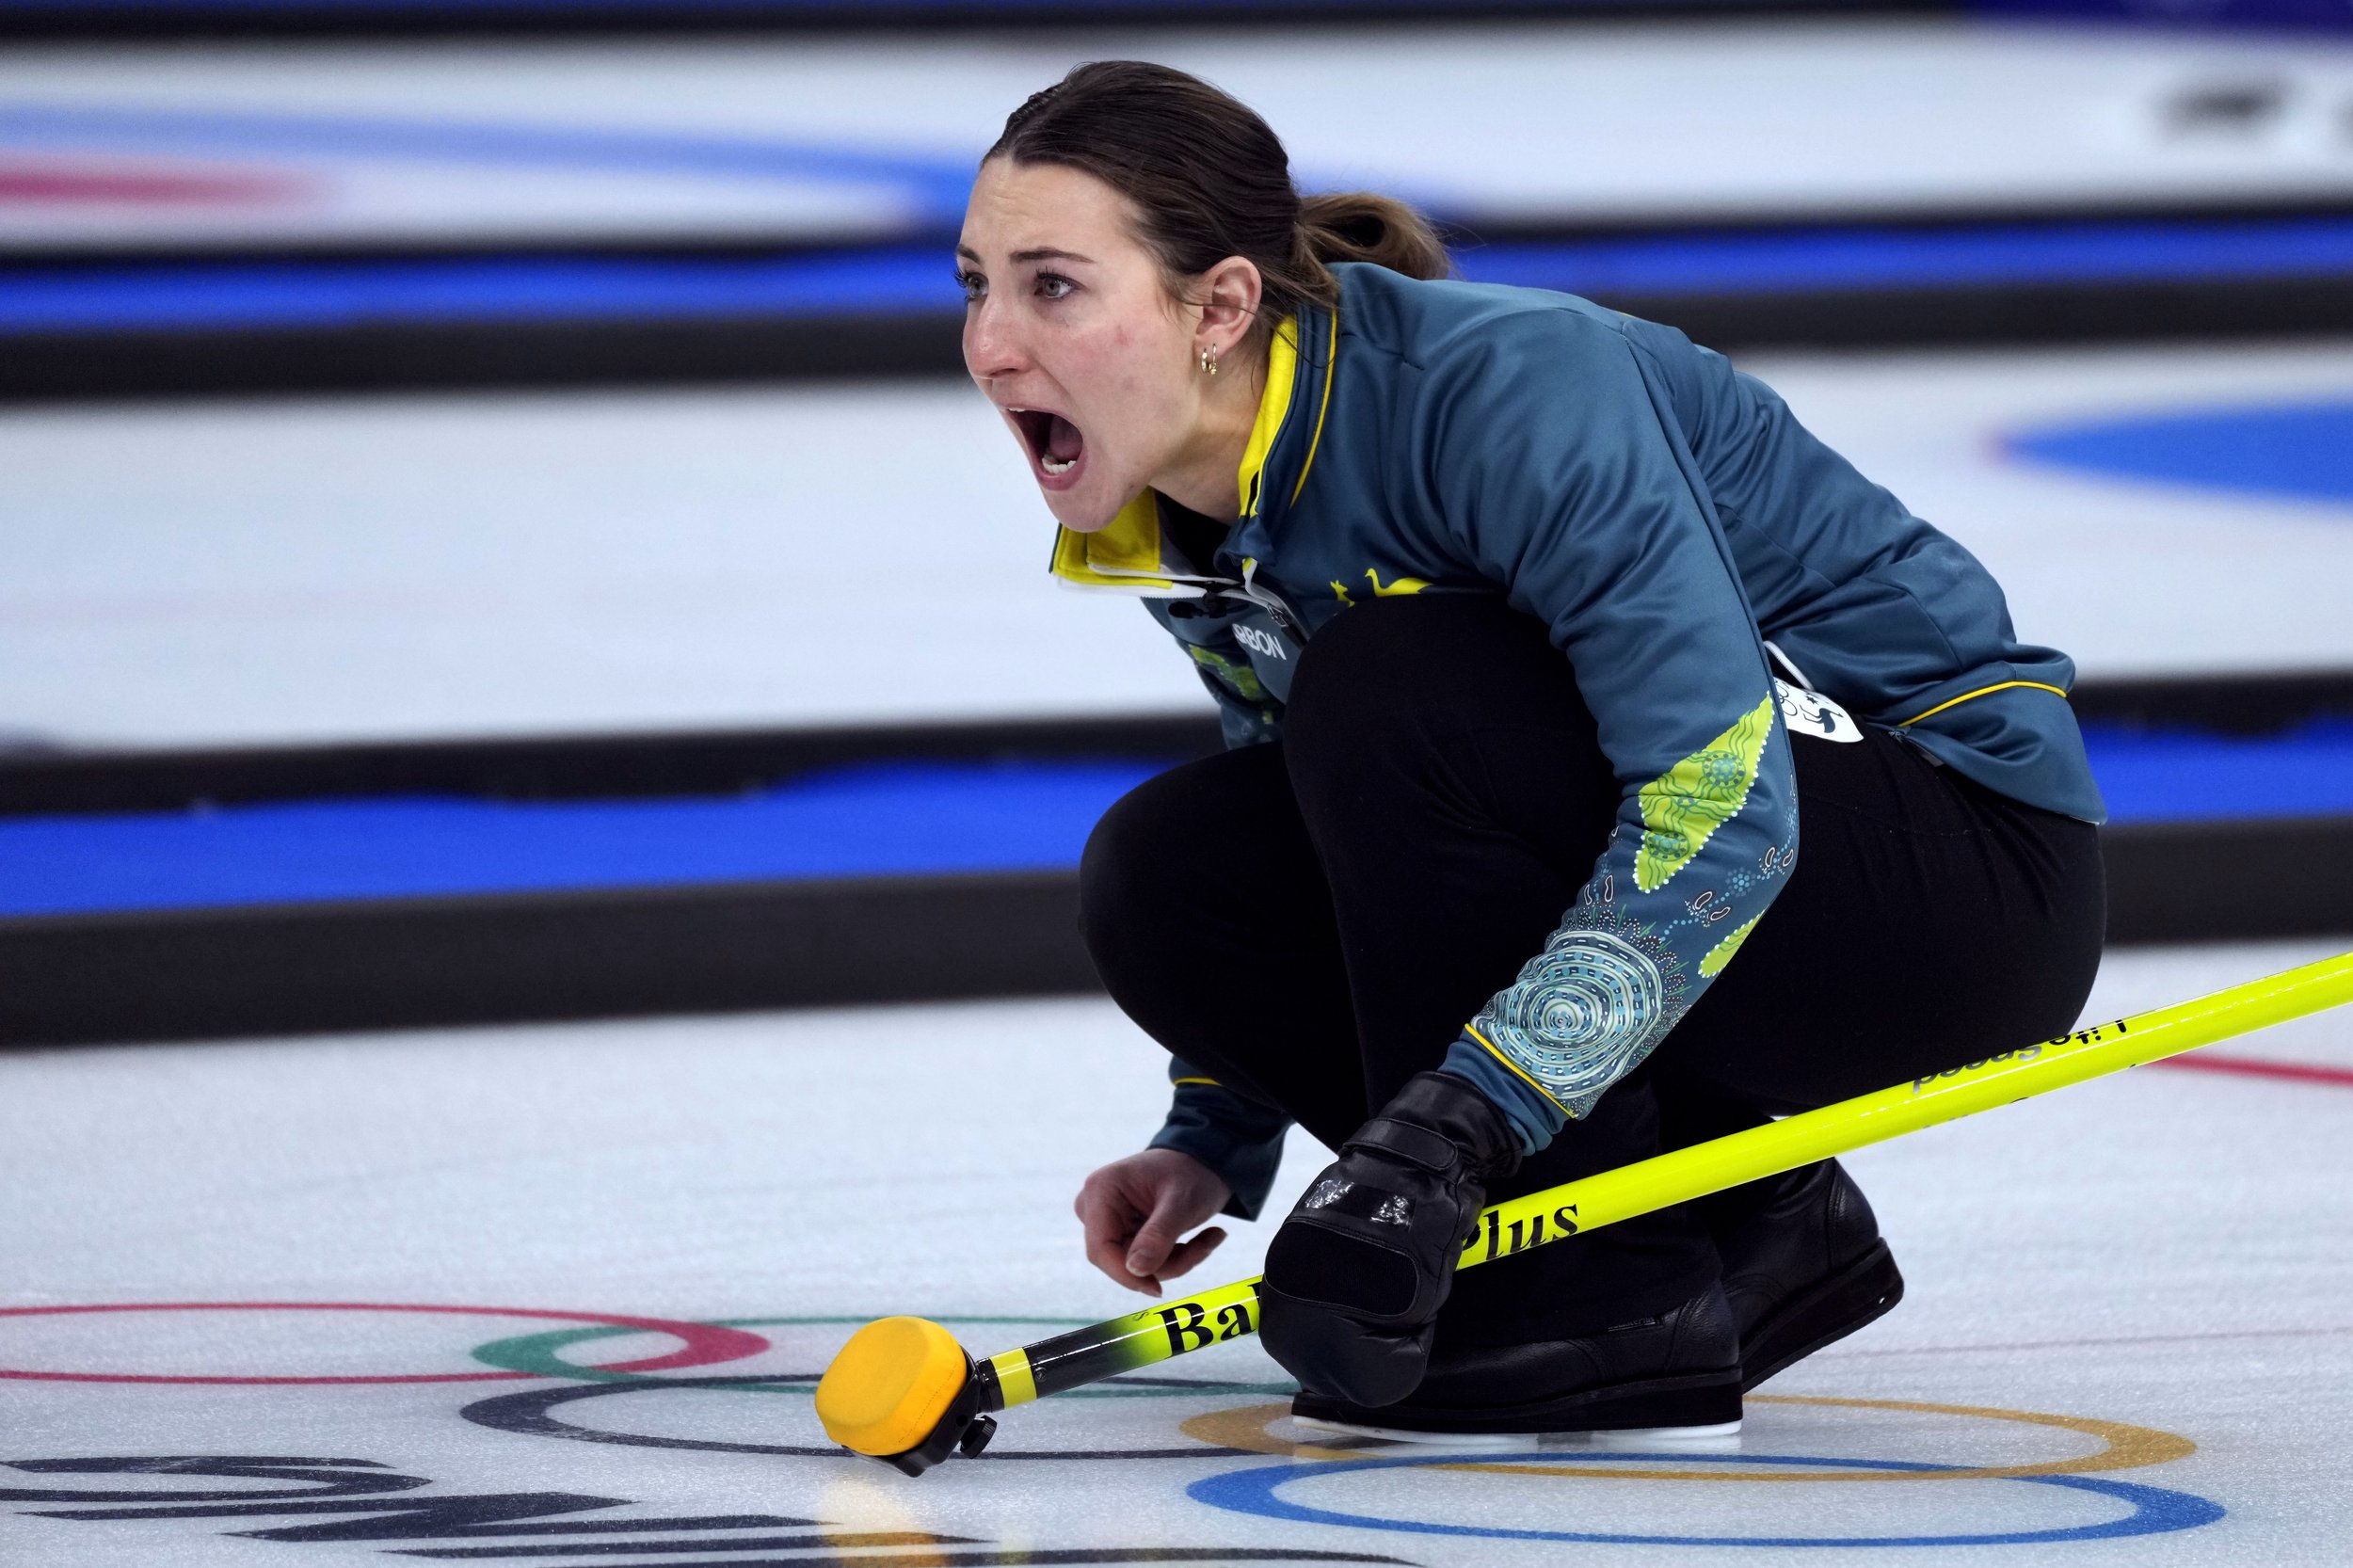  Australia's Tahli Gill, directs her teammate, during the mixed doubles match against Norway, at the 2022 Winter Olympics, Saturday, Feb. 5, 2022, in Beijing. (AP Photo/Nariman El-Mofty) 